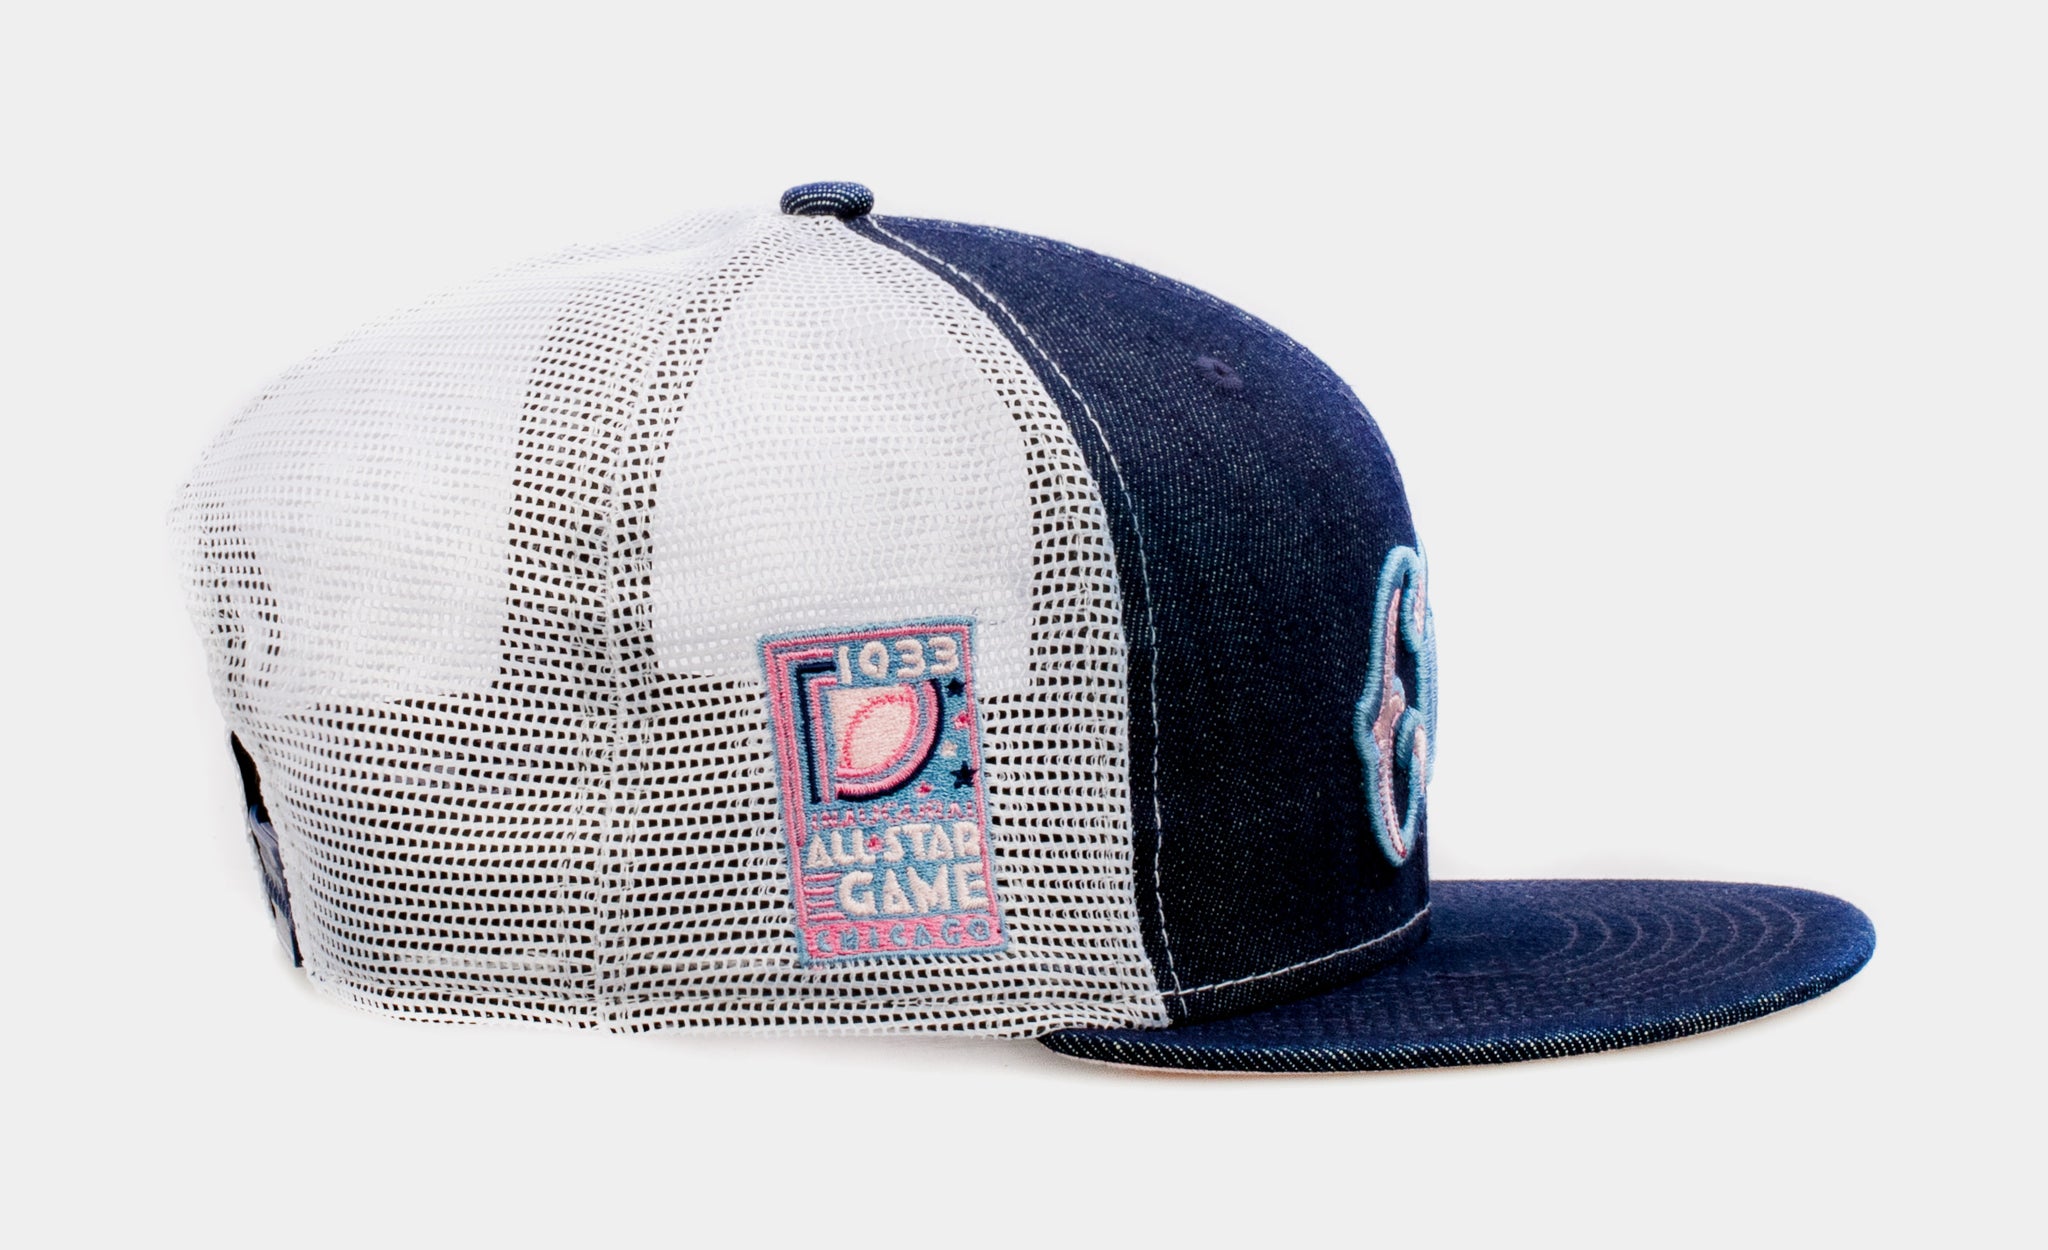 New Era Shoe Palace Exclusive Denim Trucker Chicago Cubs 9FIFTY Mens Snapback Hat (Blue/Pink)